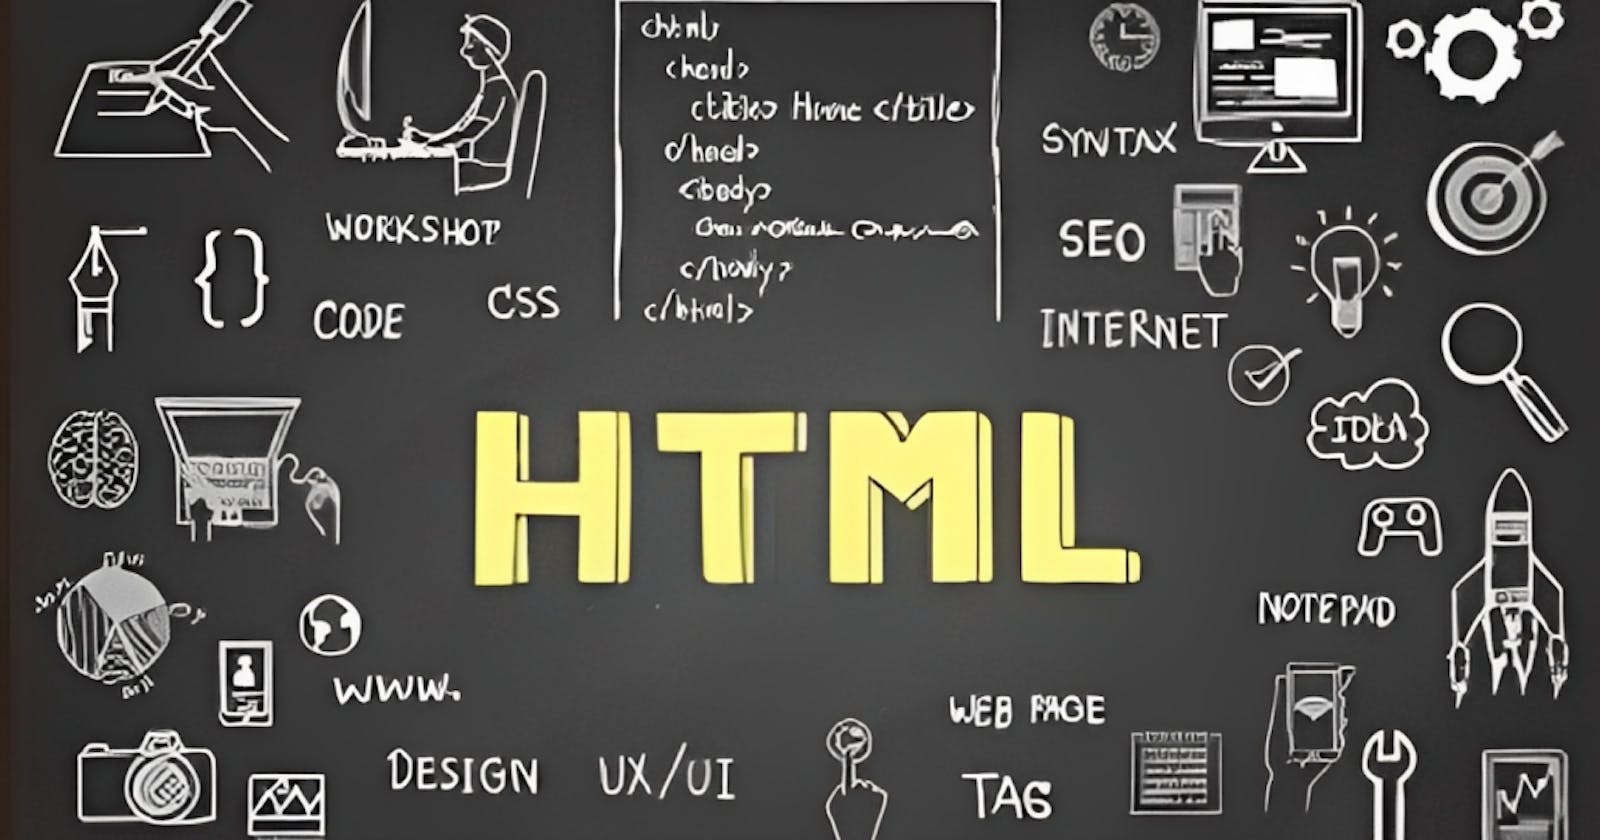 Wrapping Up Our HTML Journey: Making Sense of It All